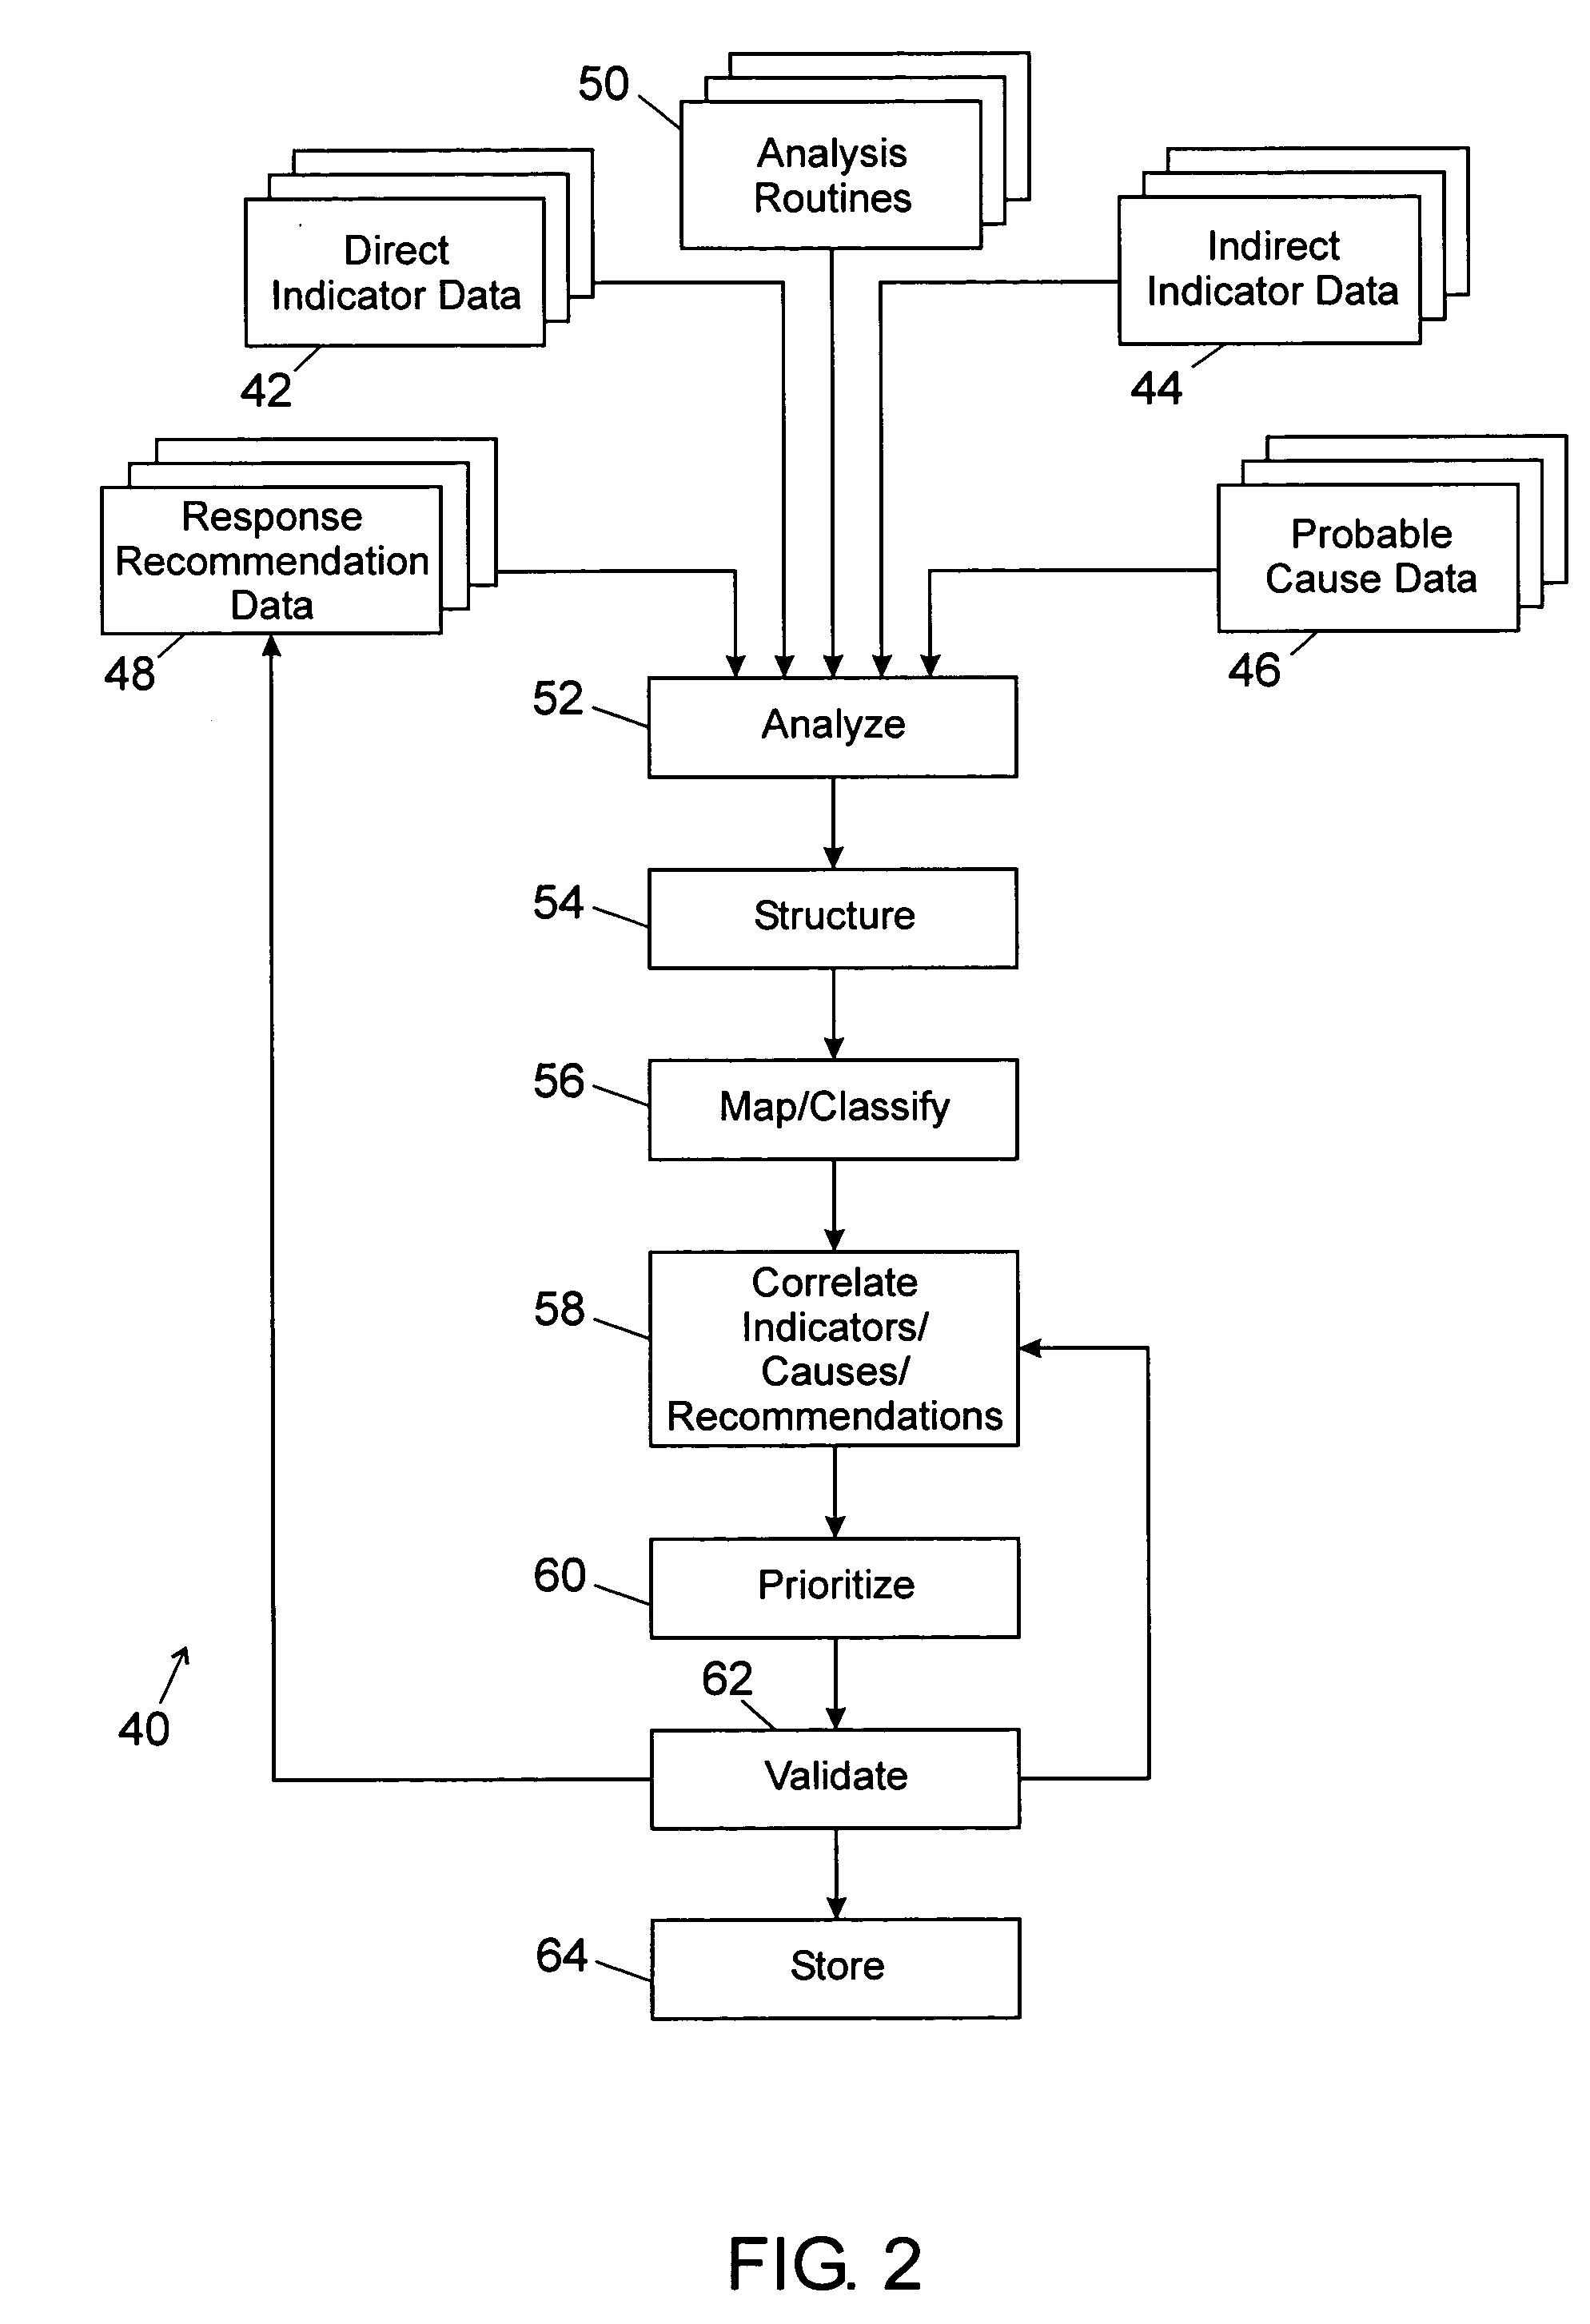 Remote monitoring and diagnostics service prioritization method and system